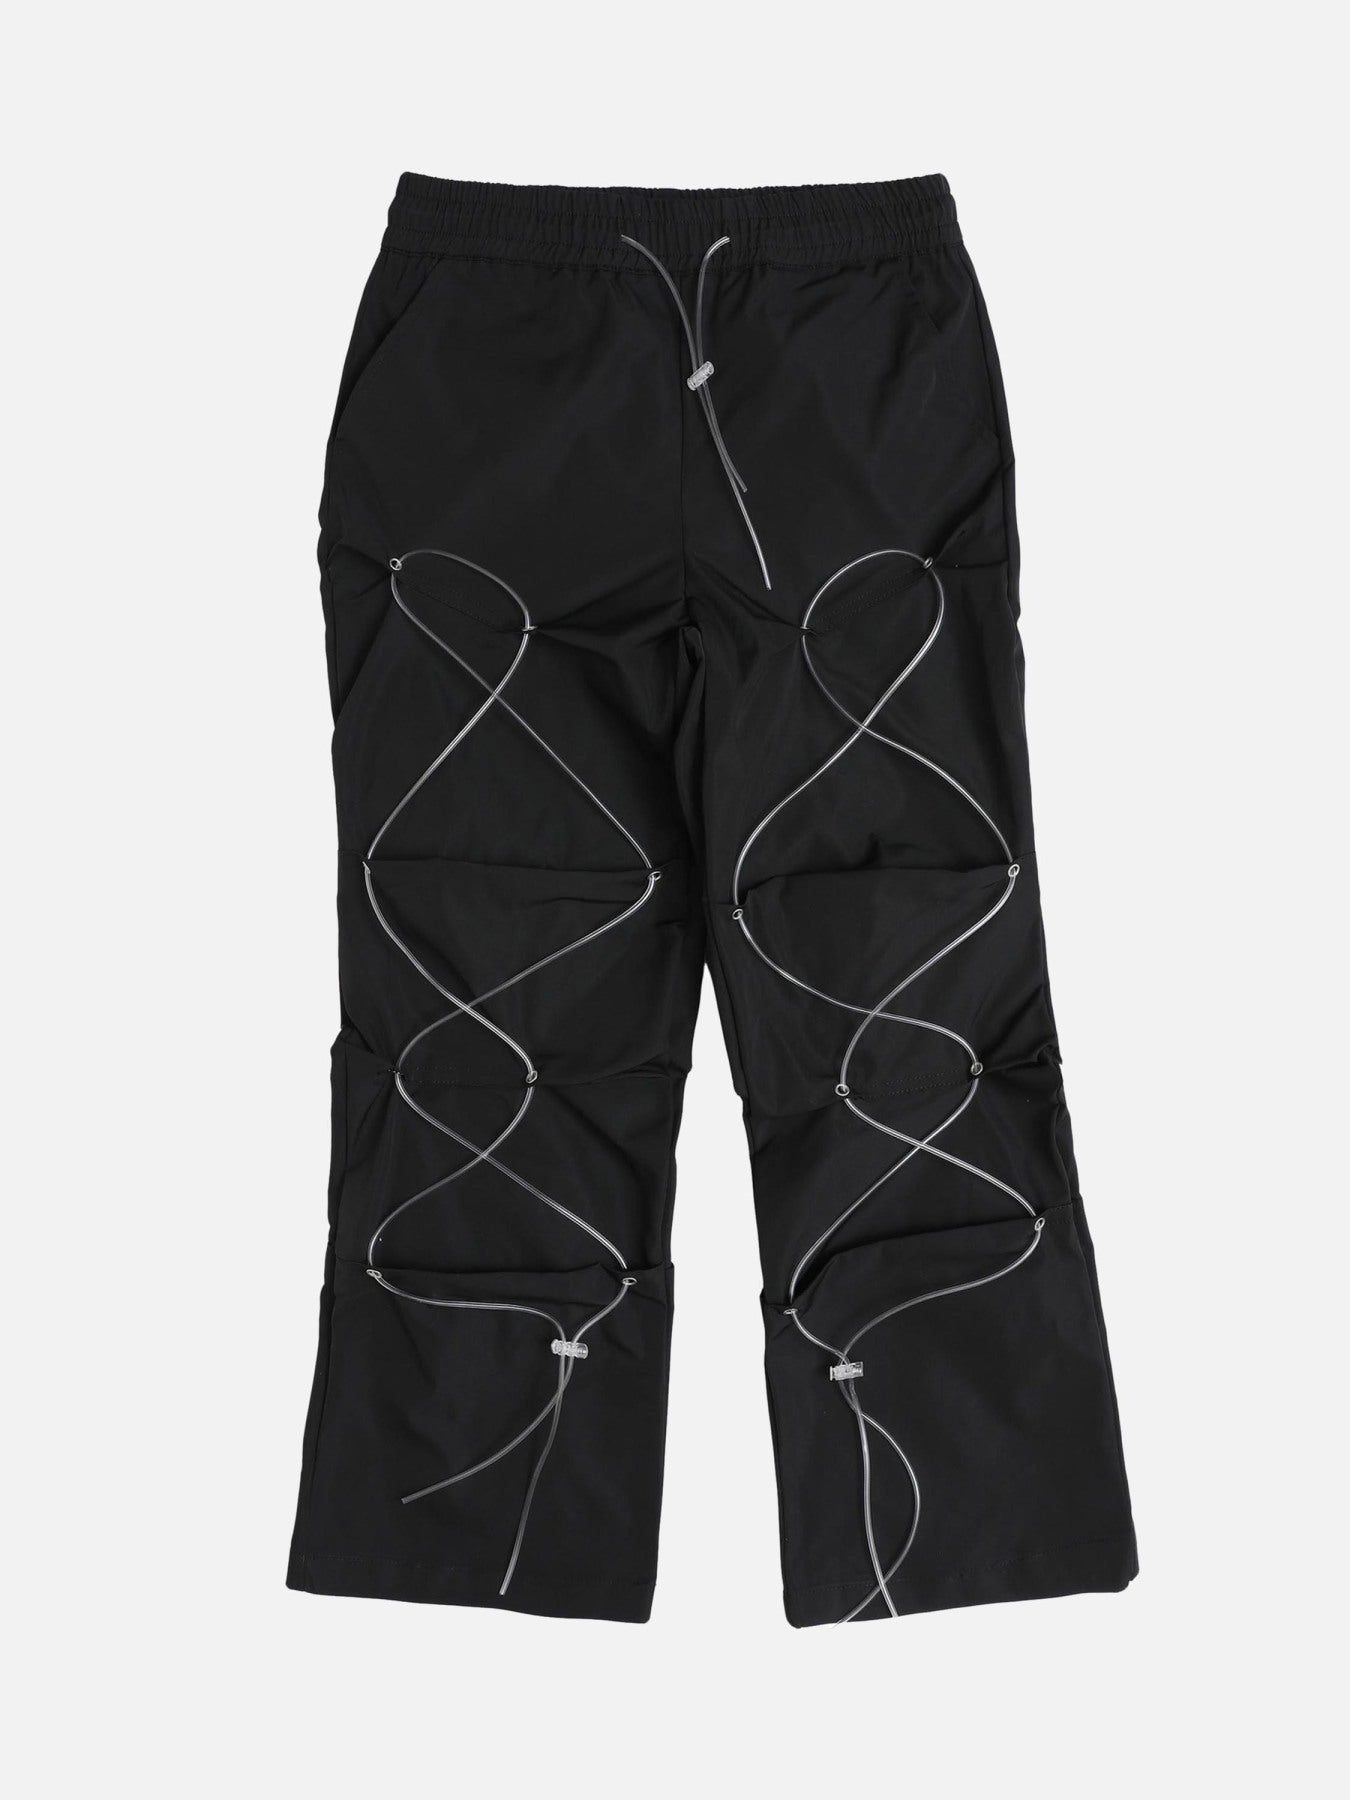 Thesupermade Drawstring Pleated Sports Loose Pants